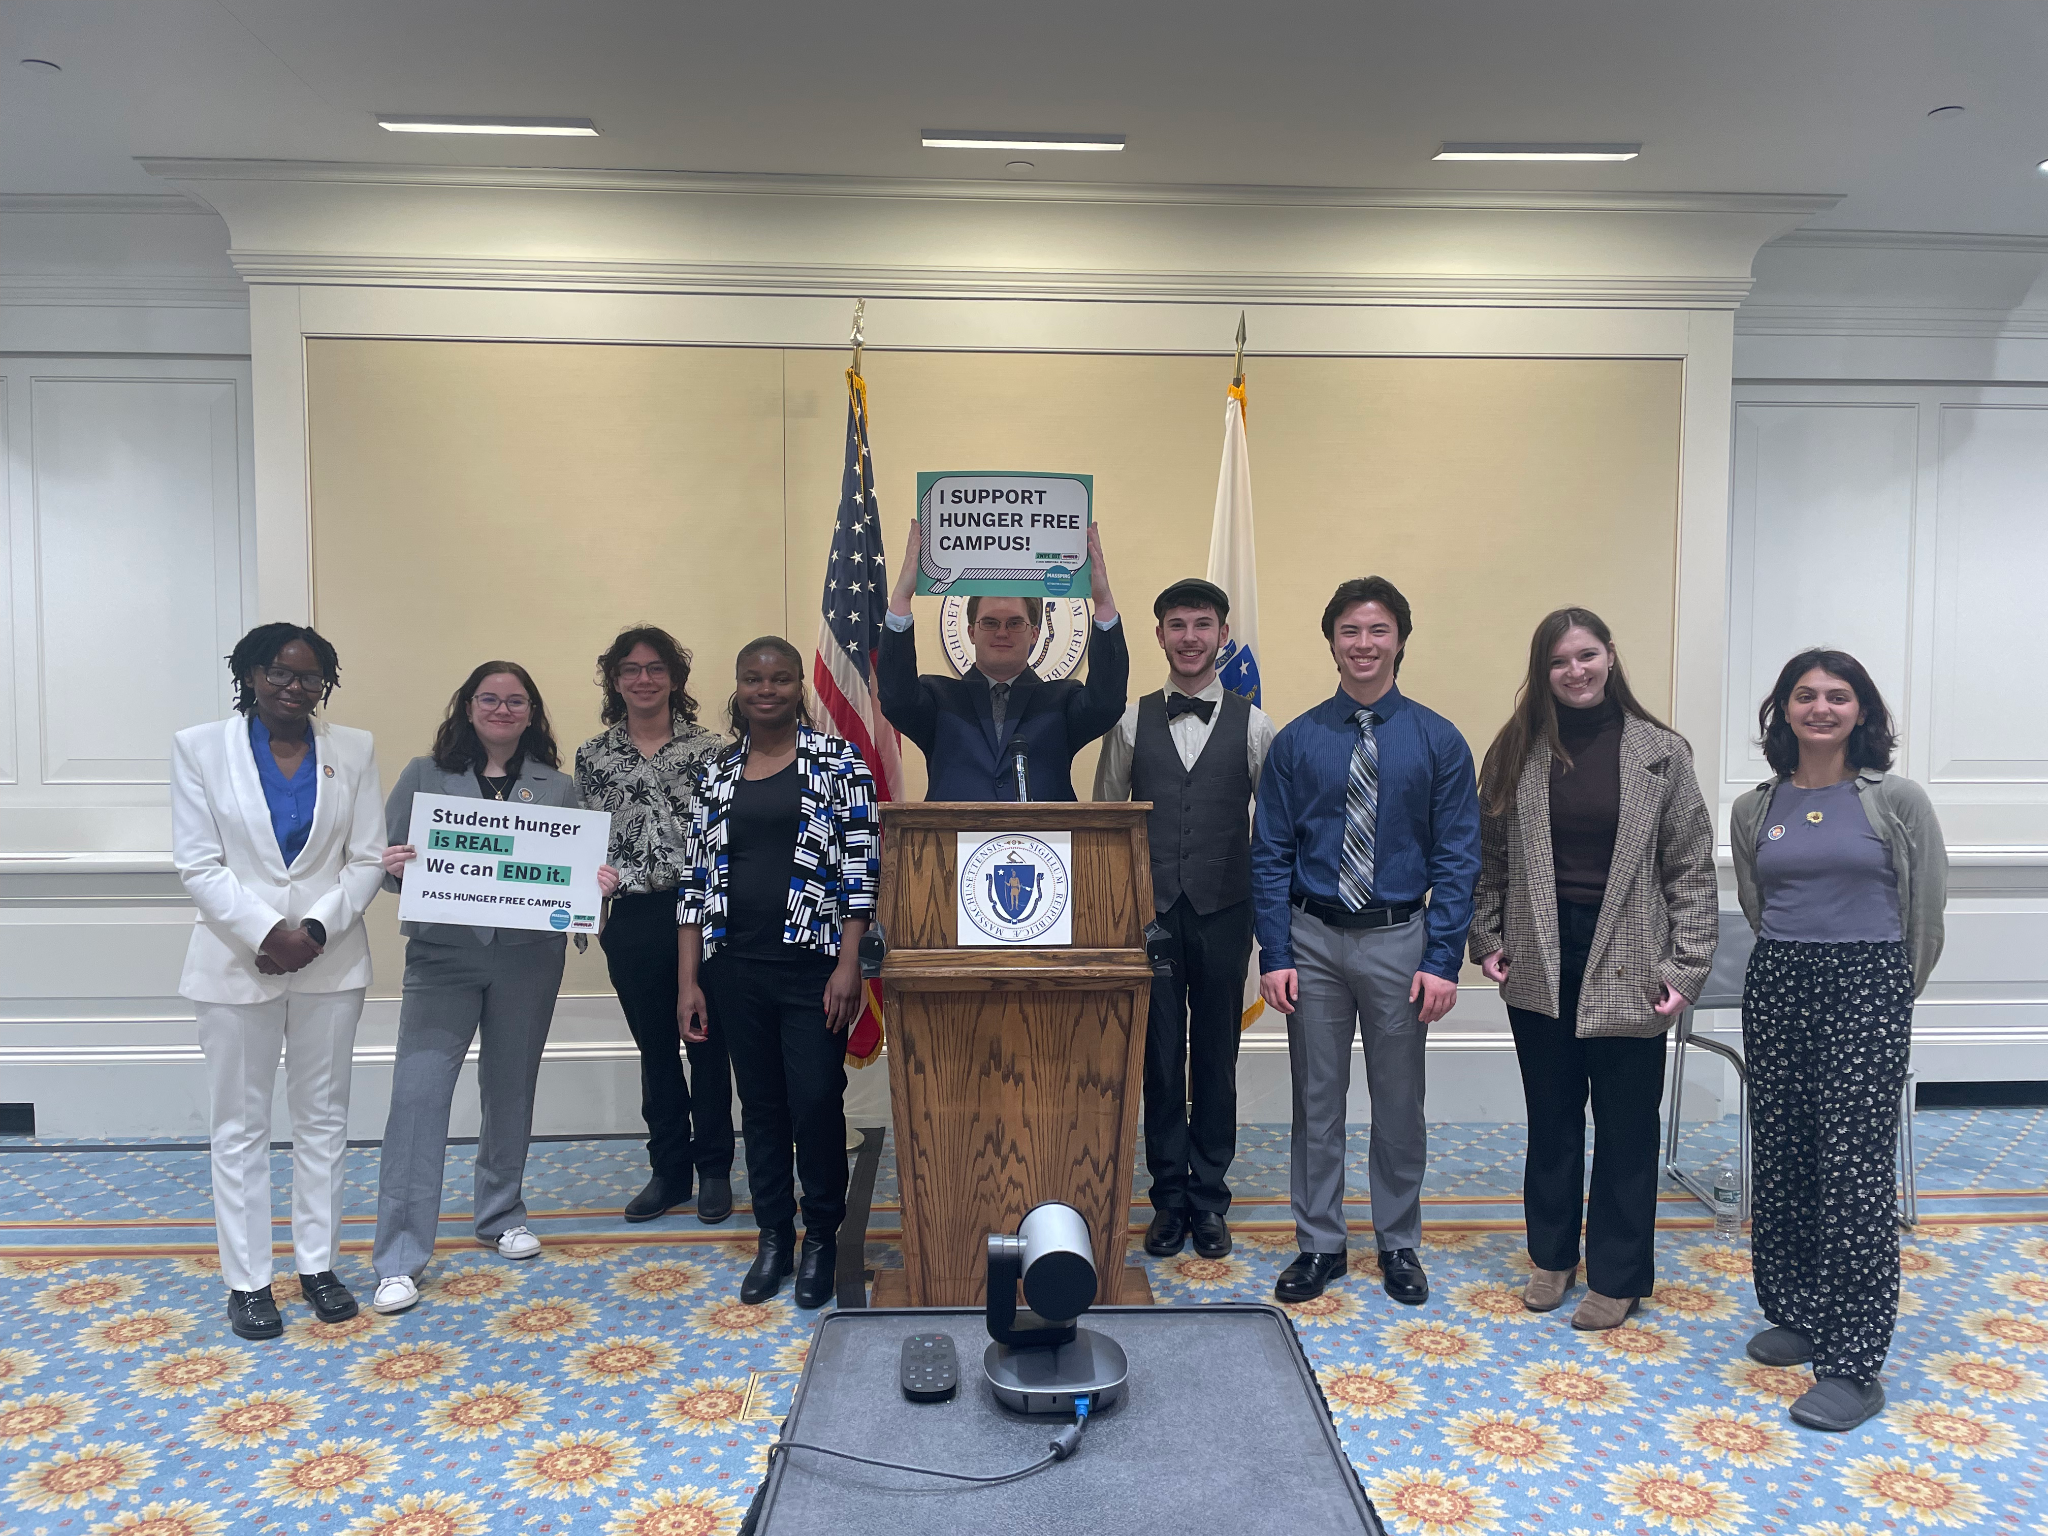 A group of nine people stands in a conference room with an American flag and the Massachusetts state flag behind them. They are posing for a photo, and most are smiling. The group includes individuals of different ages and ethnic backgrounds. Two people in the front row are holding signs that read, "Student hunger is REAL. We can END it. PASS HUNGER FREE CAMPUS" and "I SUPPORT HUNGER FREE CAMPUSES." The setting appears to be an official or formal environment, possibly a government building, indicated by the podium with a state seal. The room is decorated with a blue and floral patterned carpet and white paneling on the walls.